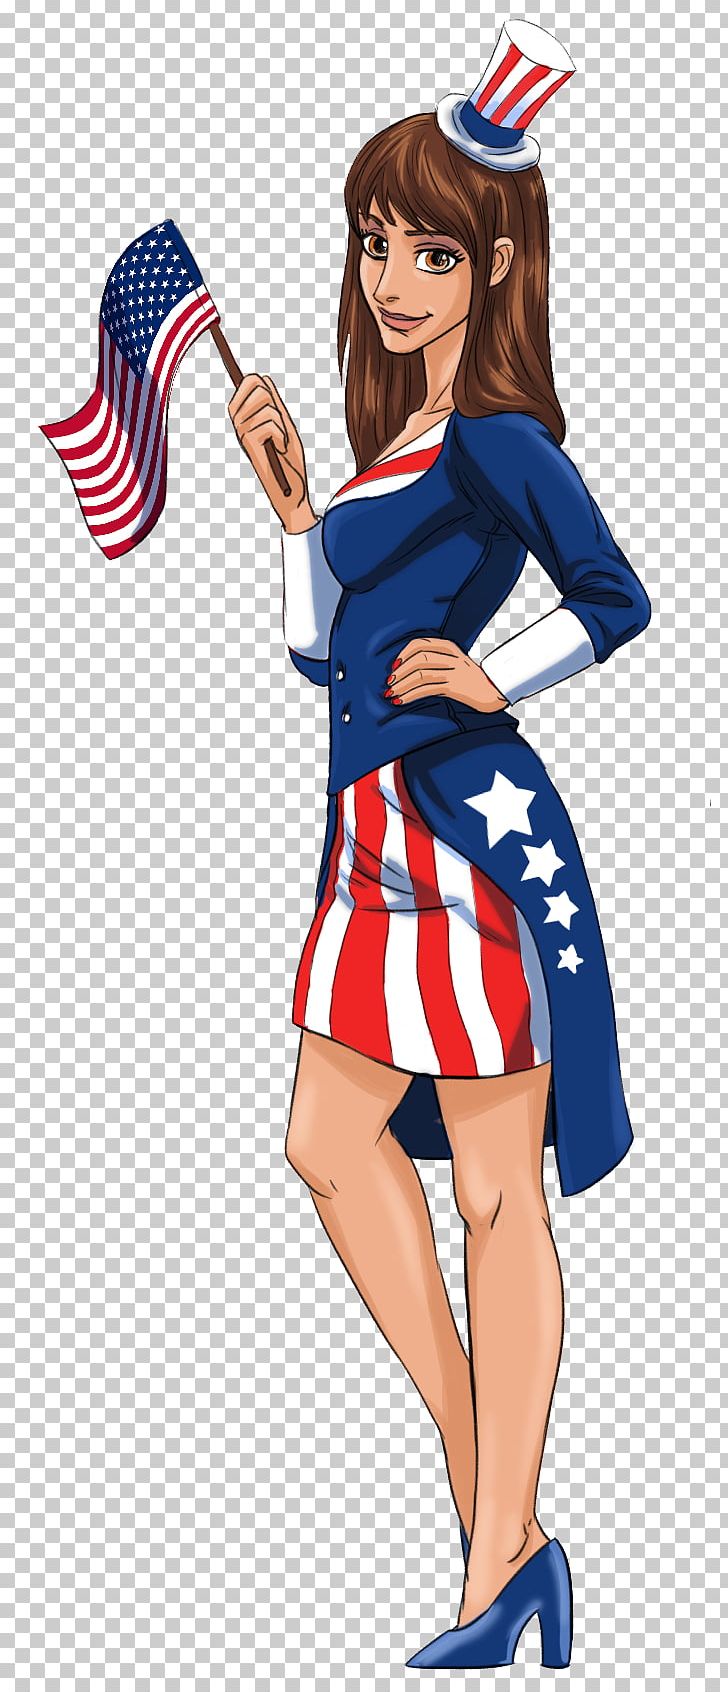 The Simpsons: Tapped Out Family Guy Independence Day Peter Griffin Cartoon PNG, Clipart, Anime, Cartoon, Cheerleading Uniform, Clothing, Costume Free PNG Download